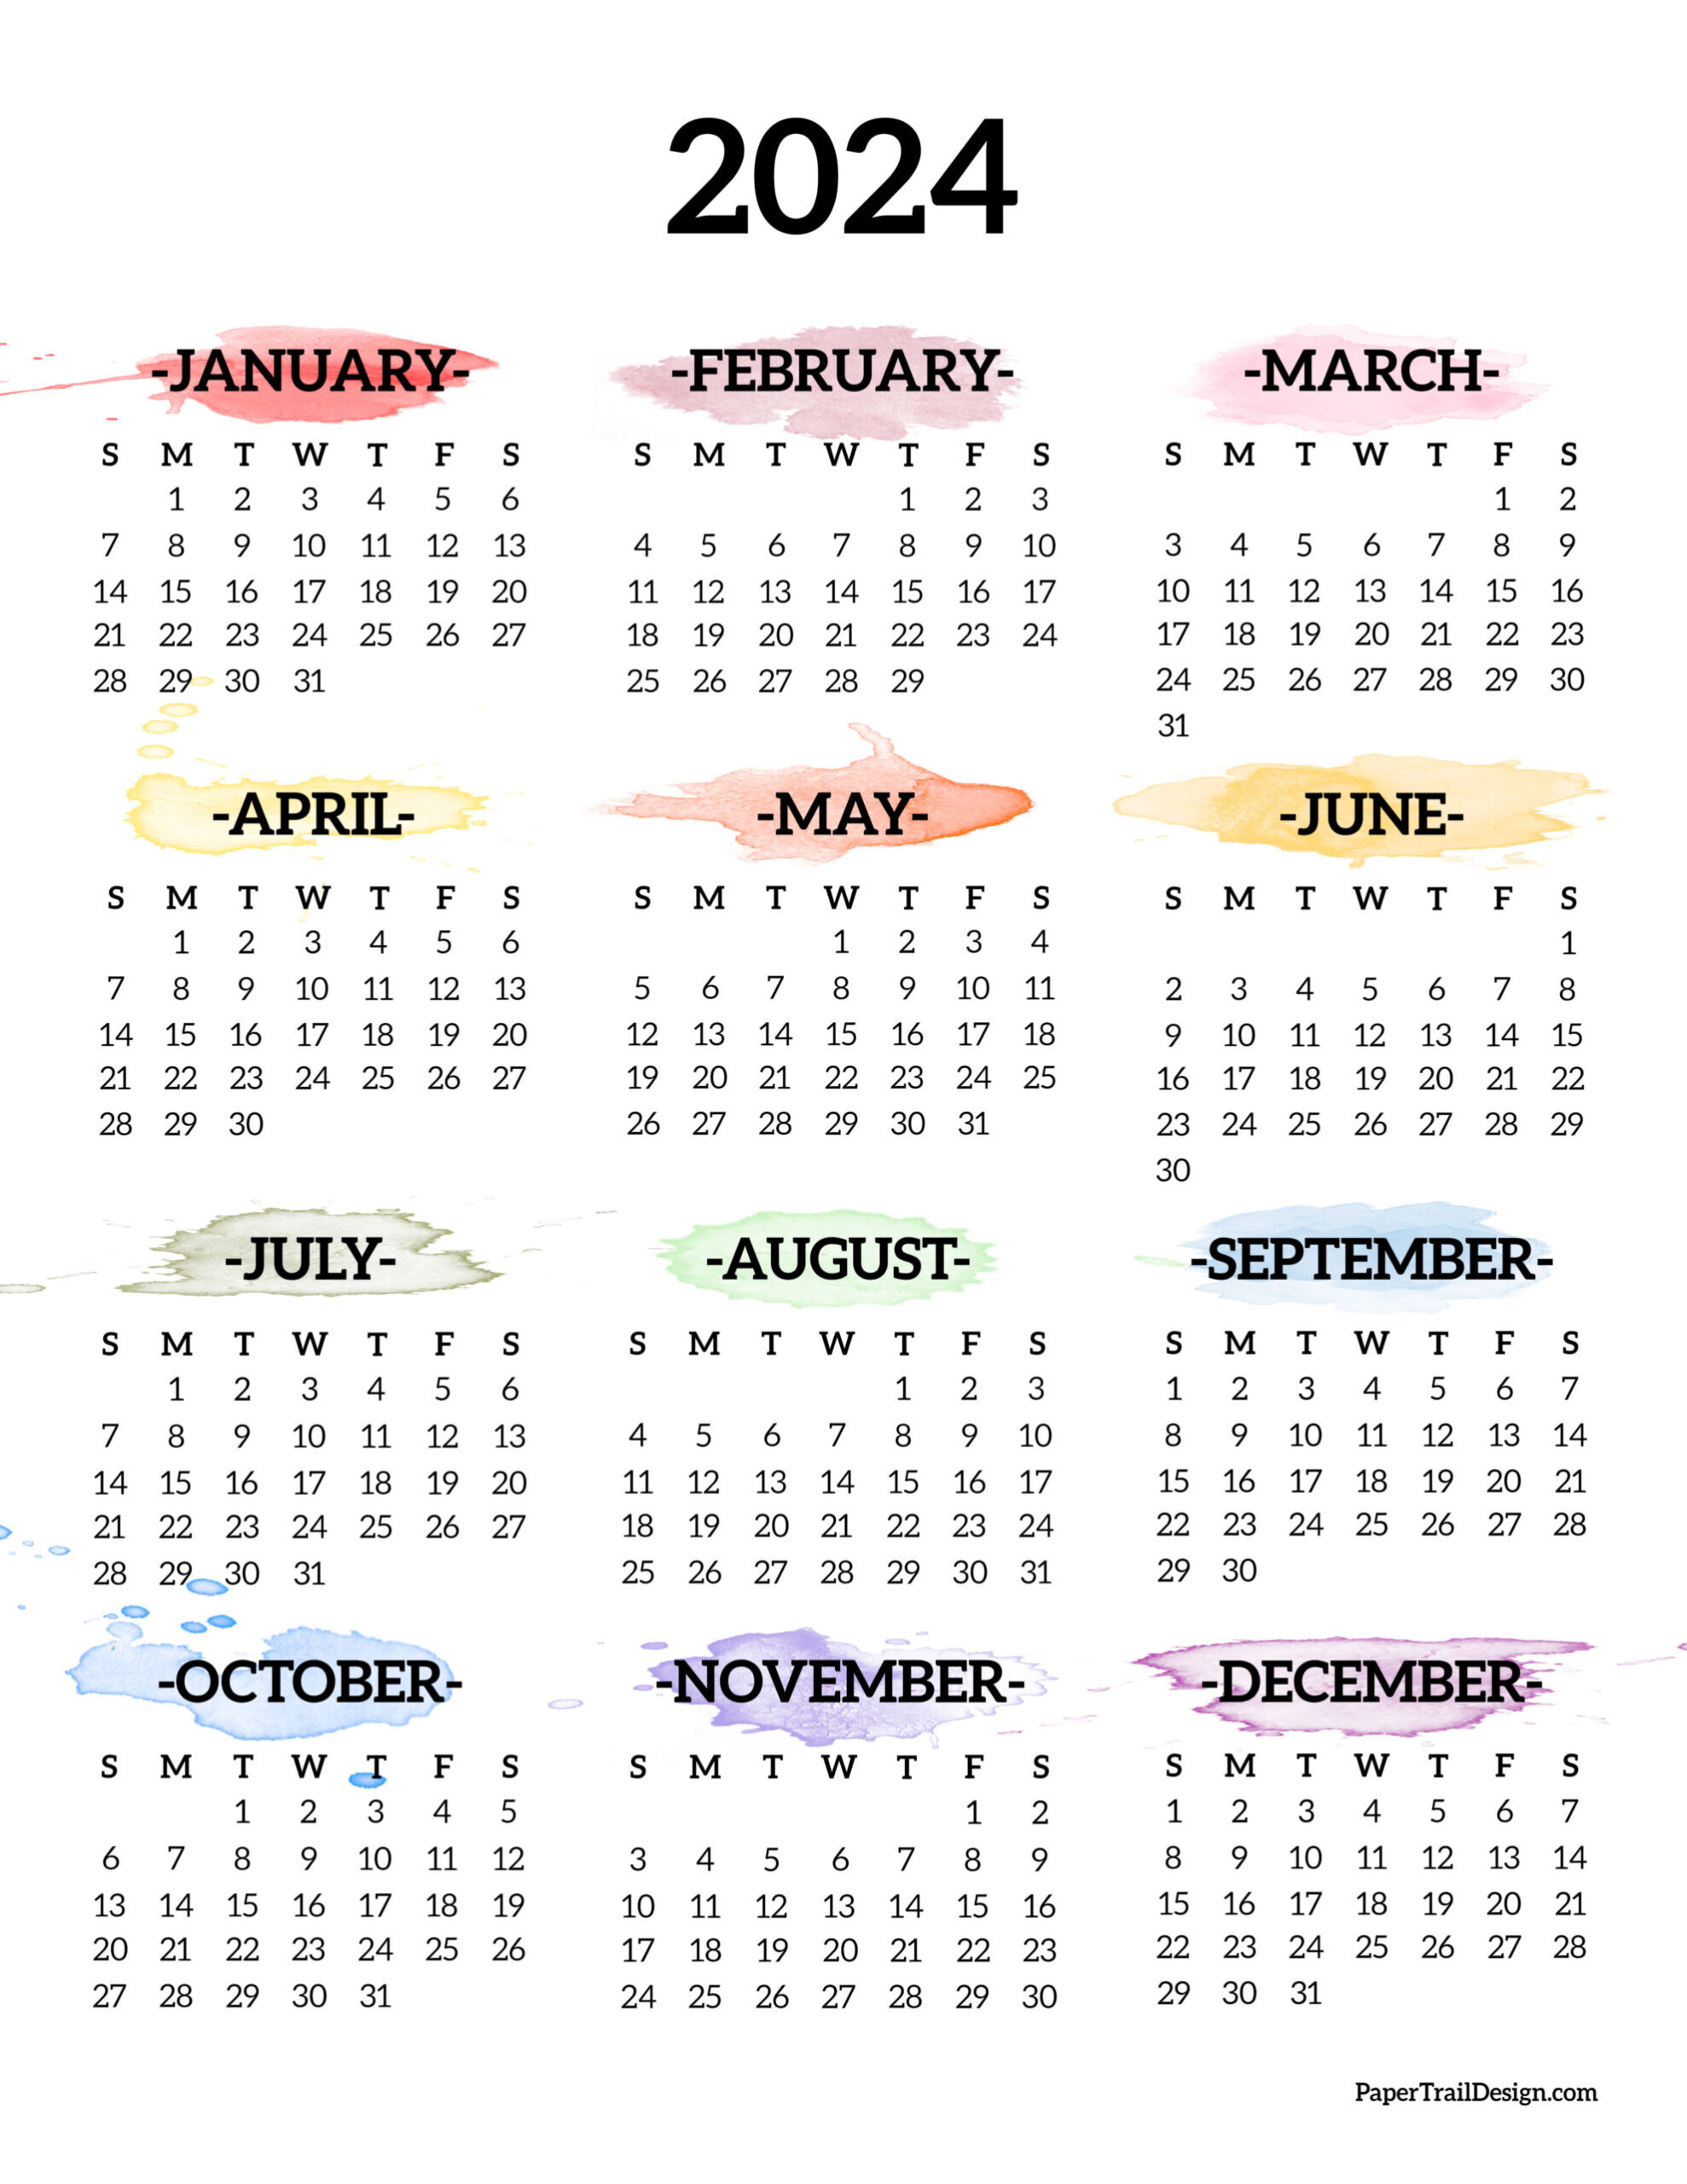 Calendar 2024 Printable One Page - Paper Trail Design | Printable Calendar Pages 2024 Free